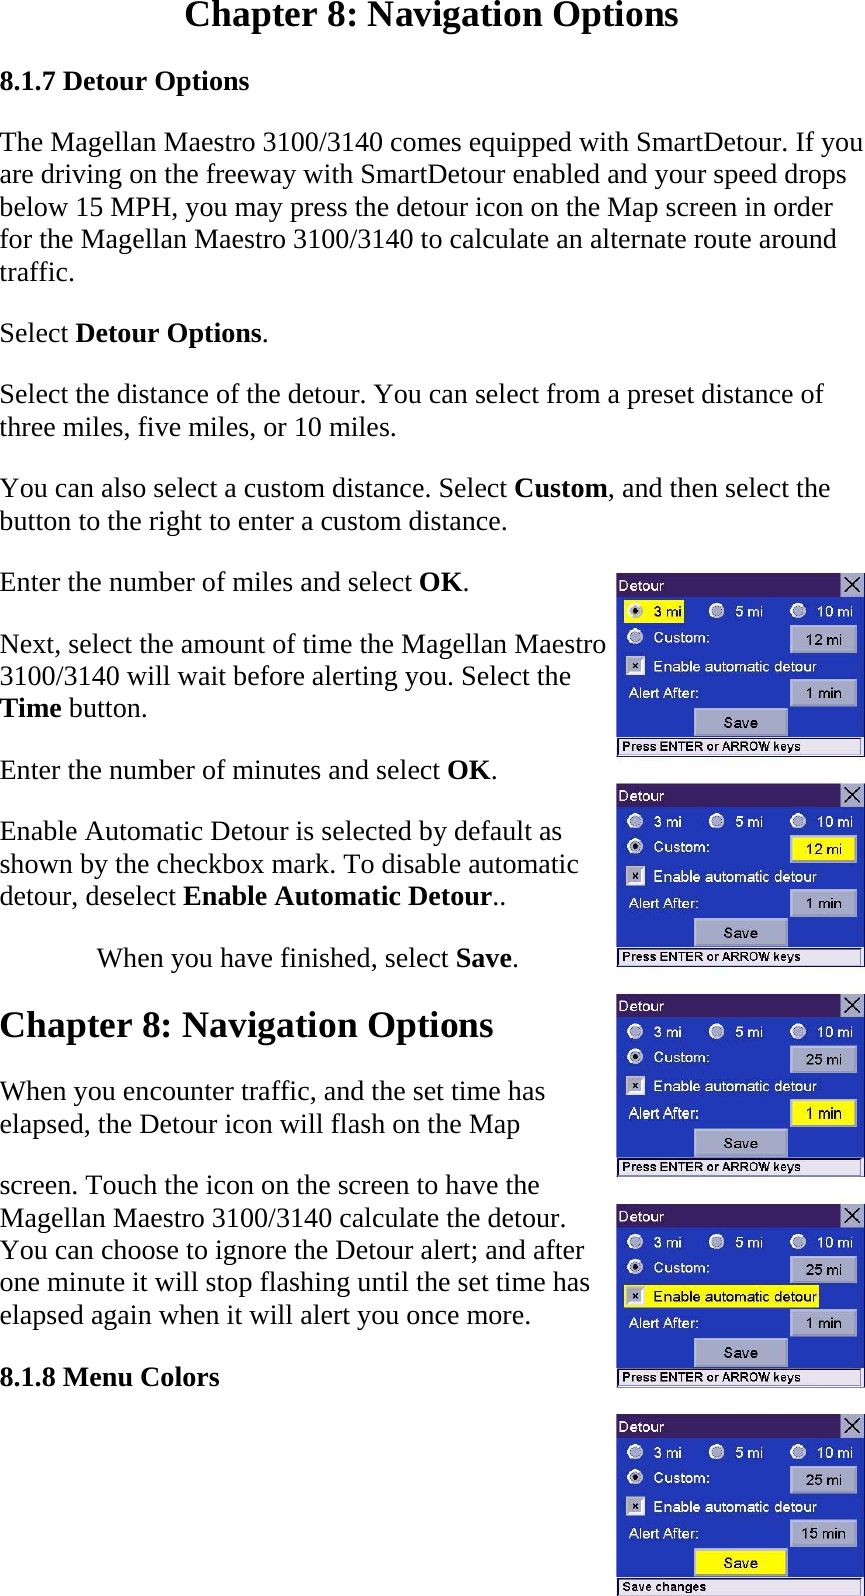 Chapter 8: Navigation Options  8.1.7 Detour Options  The Magellan Maestro 3100/3140 comes equipped with SmartDetour. If you are driving on the freeway with SmartDetour enabled and your speed drops below 15 MPH, you may press the detour icon on the Map screen in order for the Magellan Maestro 3100/3140 to calculate an alternate route around traffic.  Select Detour Options.  Select the distance of the detour. You can select from a preset distance of three miles, five miles, or 10 miles.  You can also select a custom distance. Select Custom, and then select the button to the right to enter a custom distance.  Enter the number of miles and select OK.  Next, select the amount of time the Magellan Maestro 3100/3140 will wait before alerting you. Select the Time button.  Enter the number of minutes and select OK.  Enable Automatic Detour is selected by default as shown by the checkbox mark. To disable automatic detour, deselect Enable Automatic Detour..  When you have finished, select Save.  Chapter 8: Navigation Options  When you encounter traffic, and the set time has  elapsed, the Detour icon will flash on the Map  screen. Touch the icon on the screen to have the Magellan Maestro 3100/3140 calculate the detour. You can choose to ignore the Detour alert; and after one minute it will stop flashing until the set time has elapsed again when it will alert you once more.  8.1.8 Menu Colors  